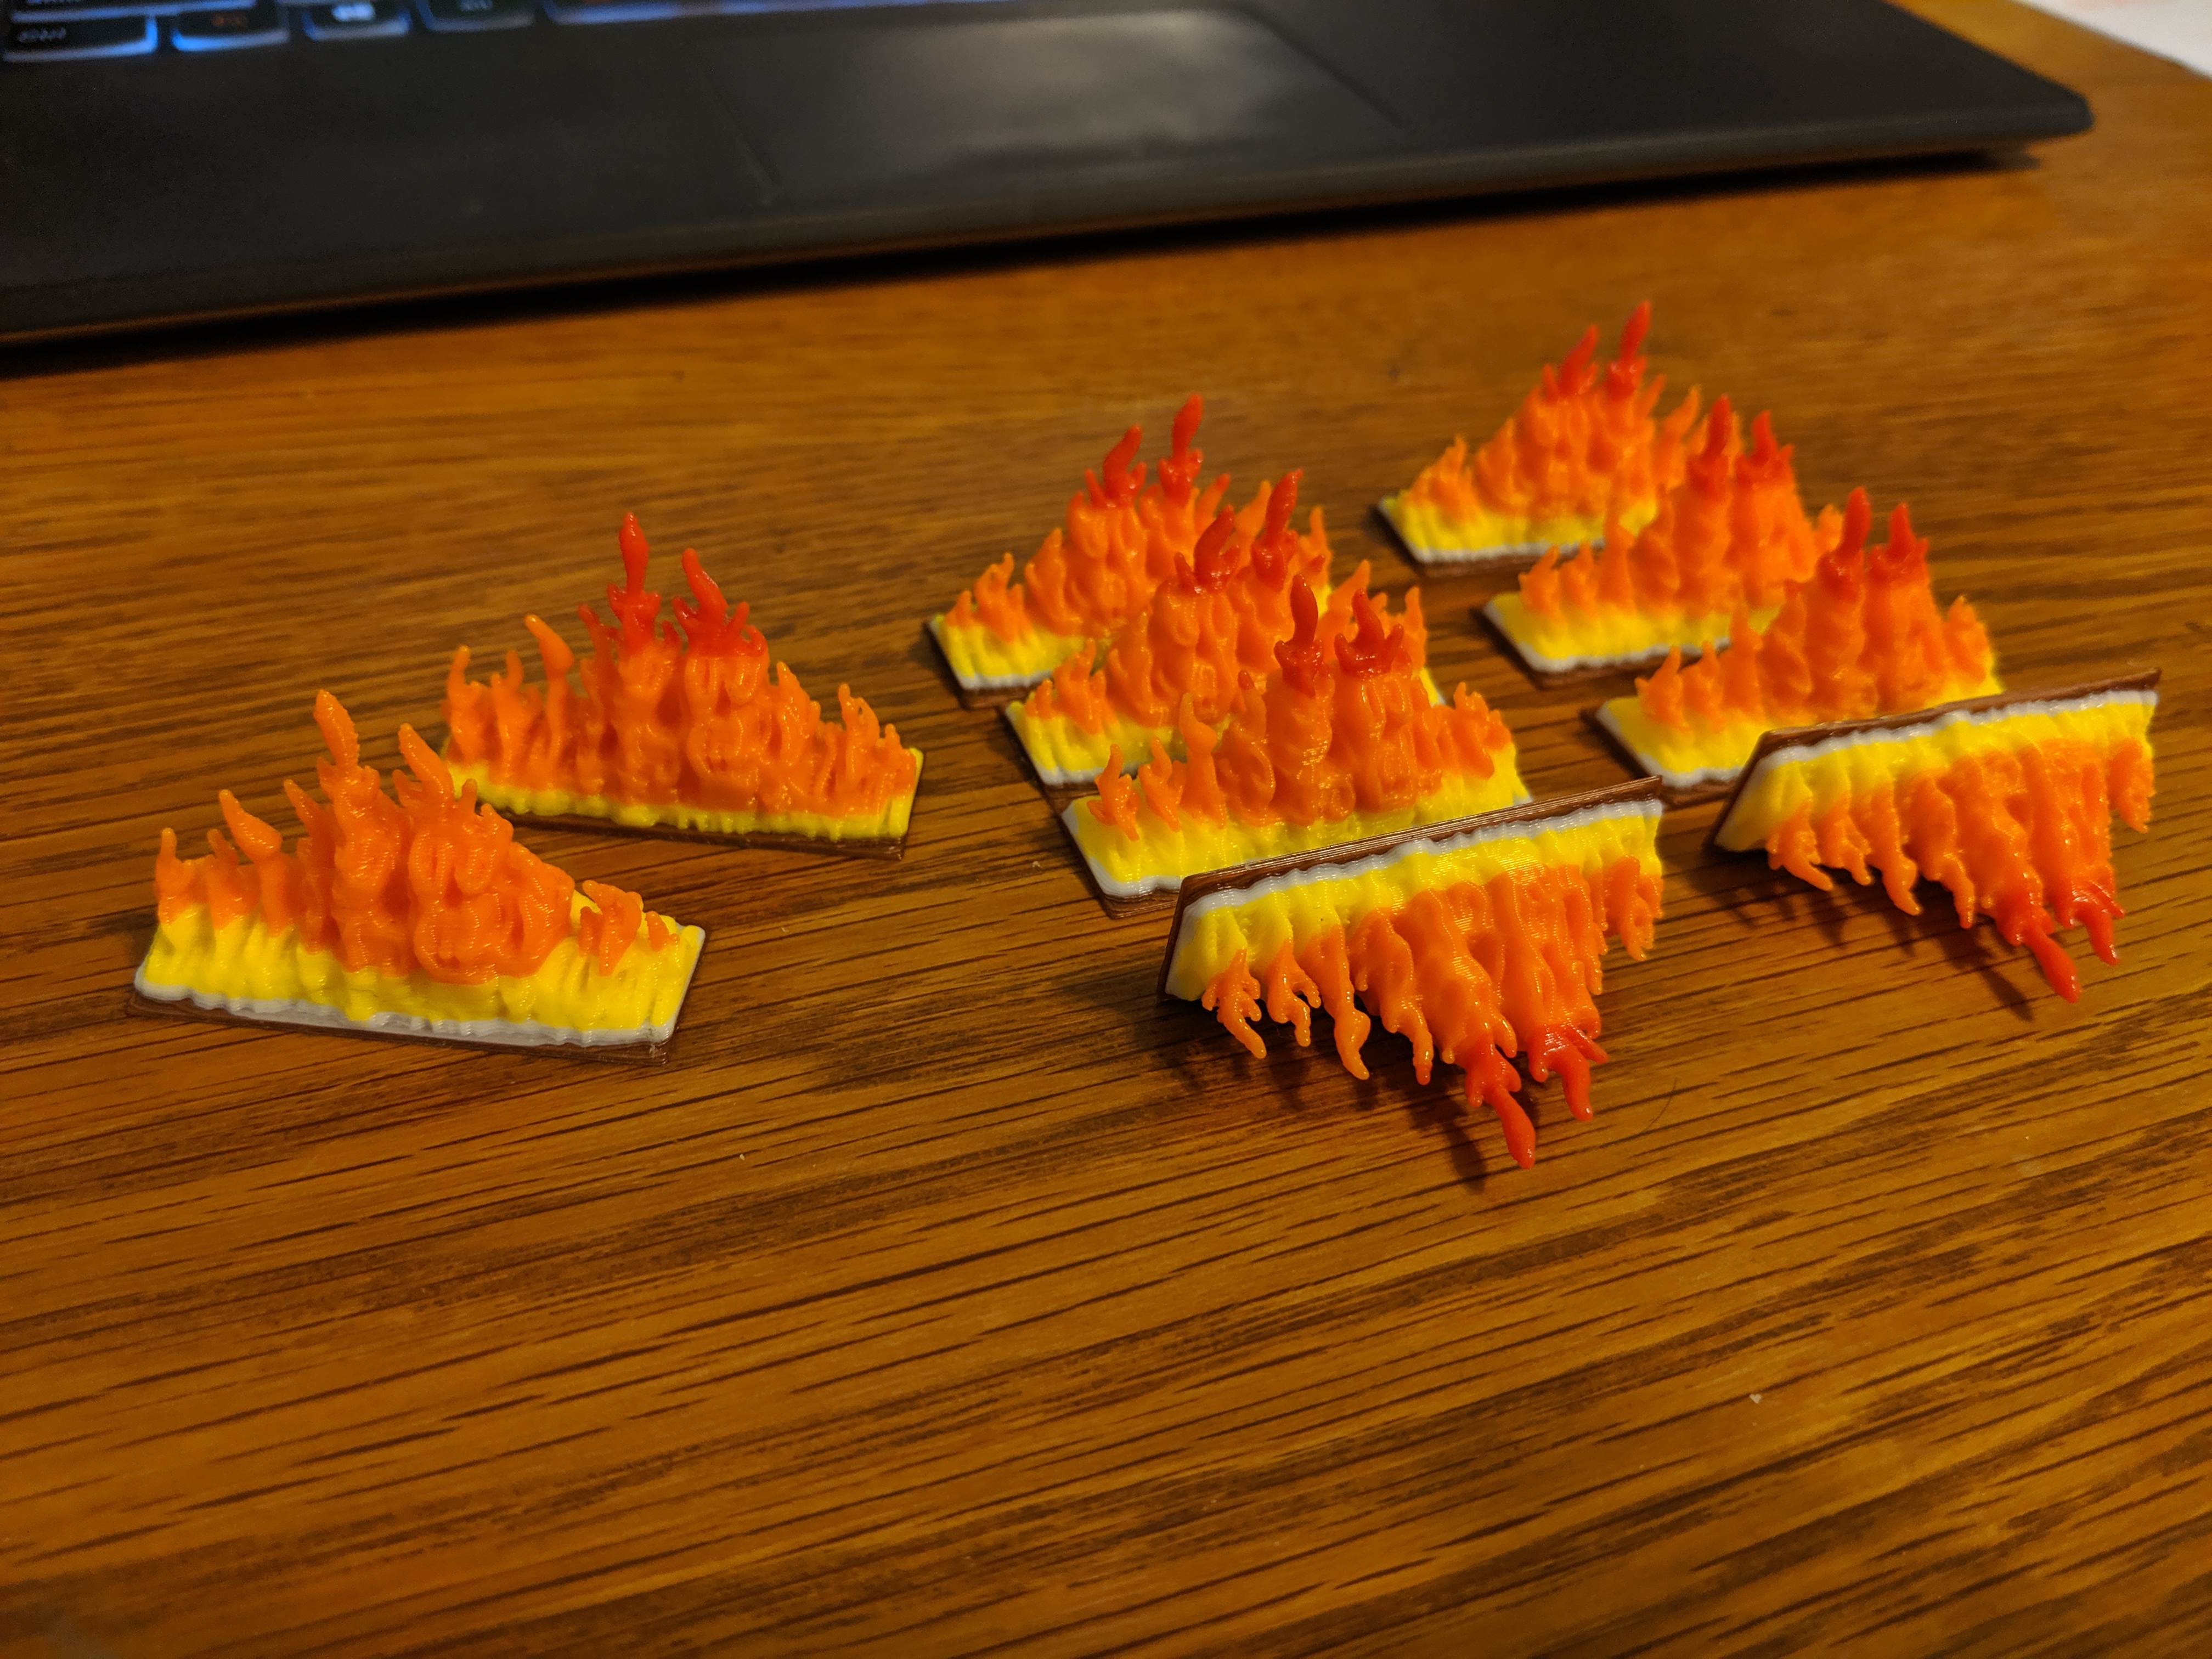 Wall of Fire (40mm wide x 25mm high x 10mm deep/thick)